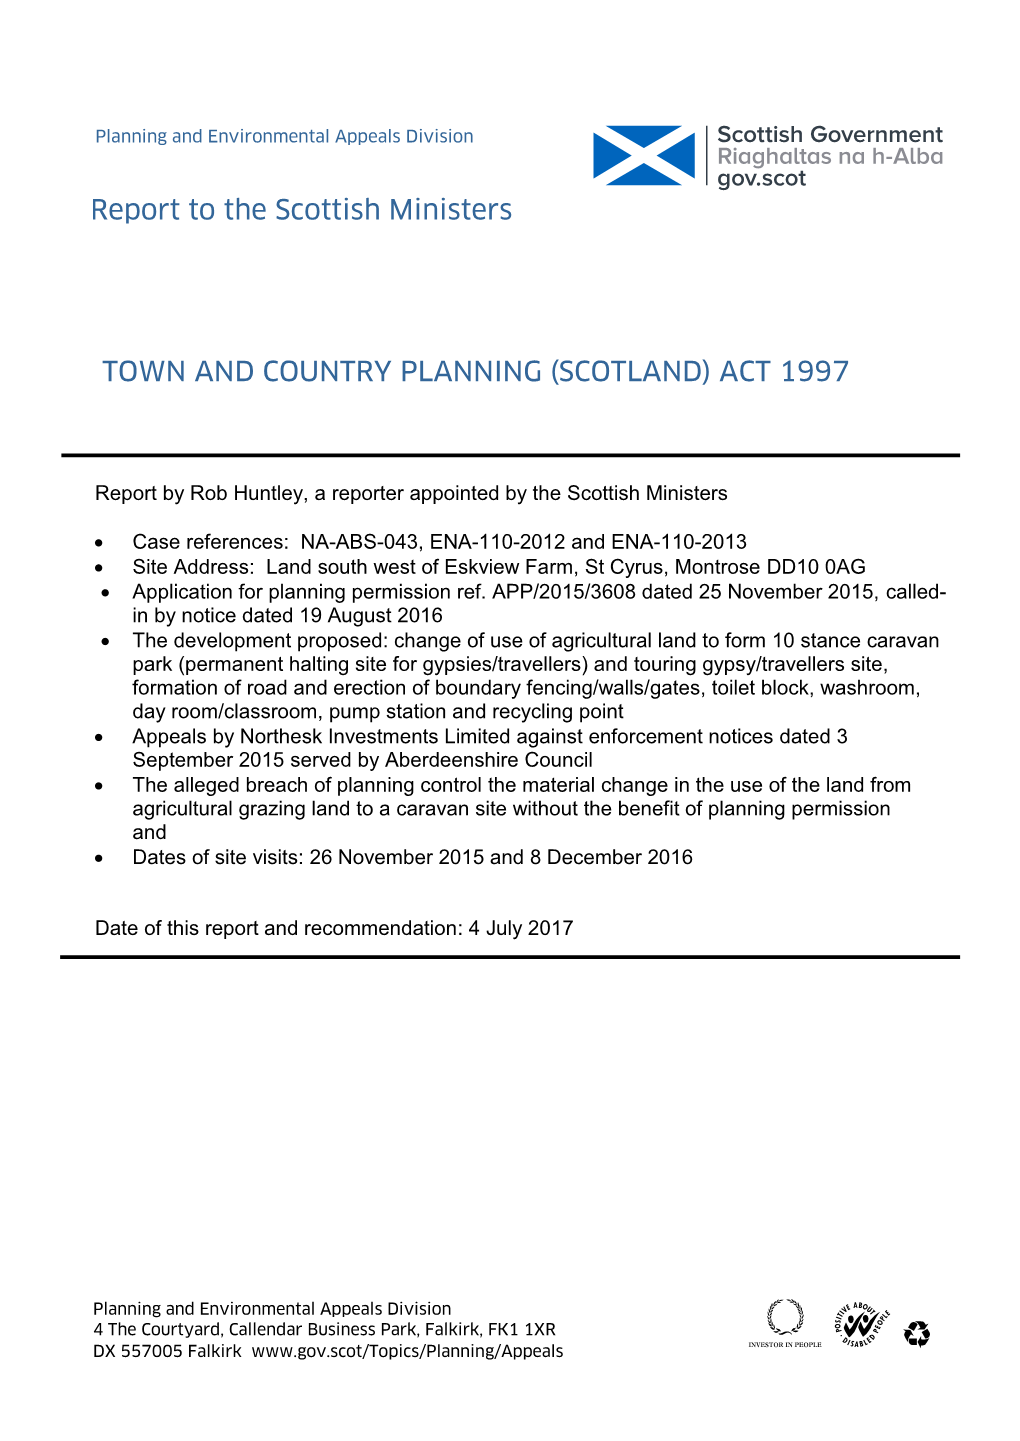 Report+To+Scottish+Ministers.Pdf